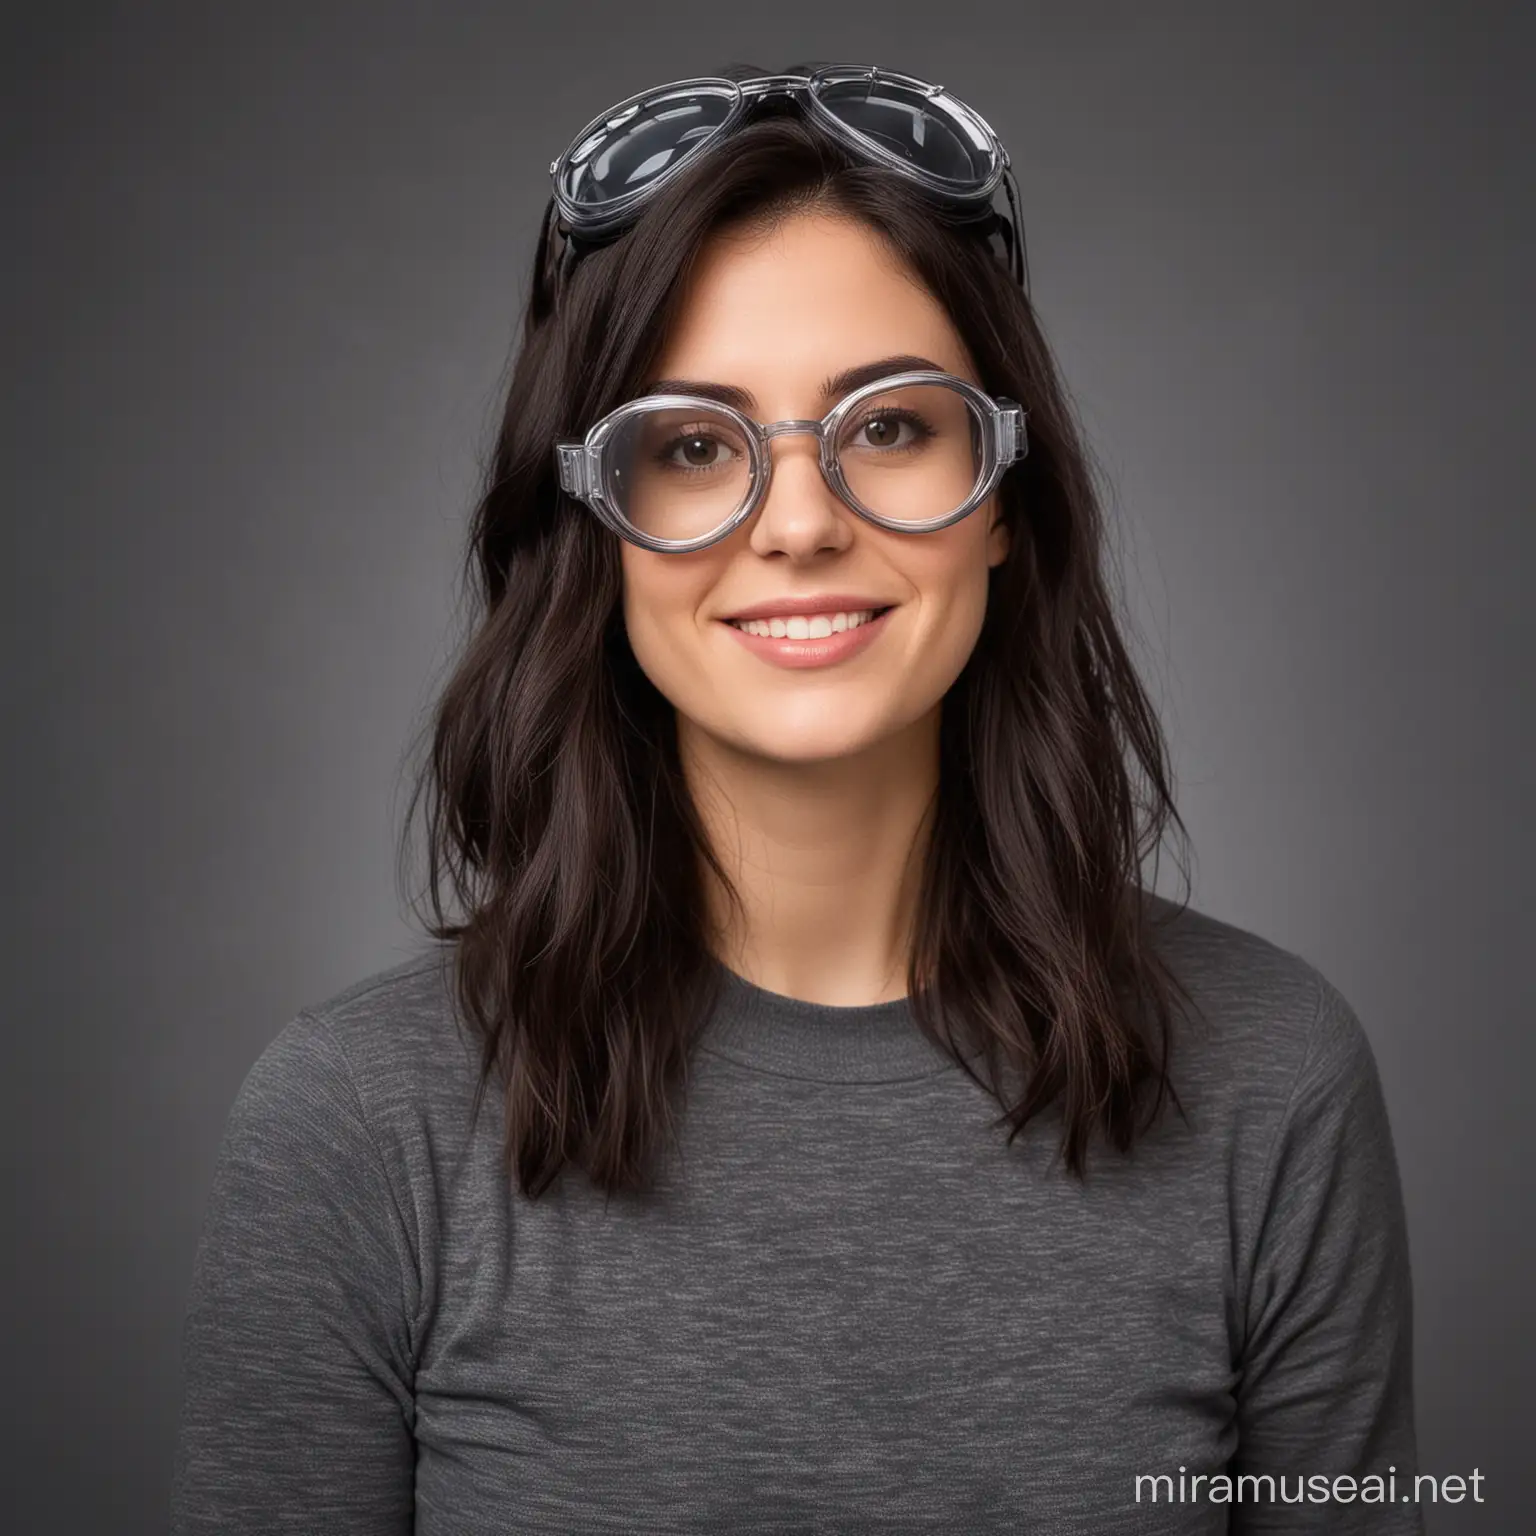 Profile Image of a Canadian Copywriter in Casual Wear with Goggles